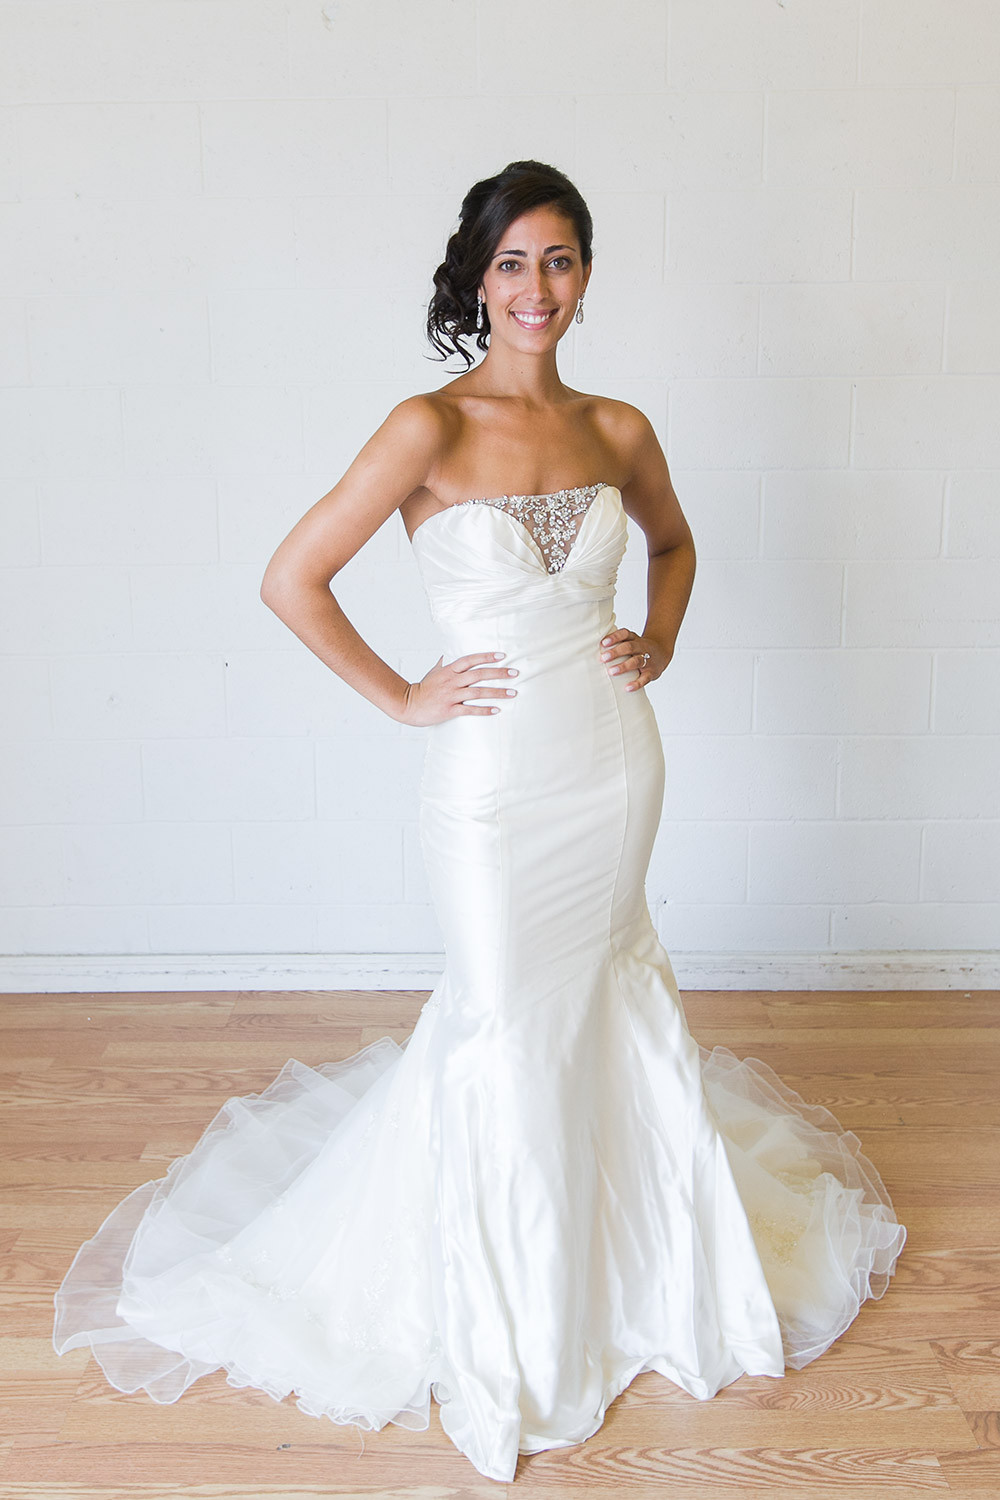 Renting Wedding Dresses
 The Pros and Cons of a Wedding Dress Rental